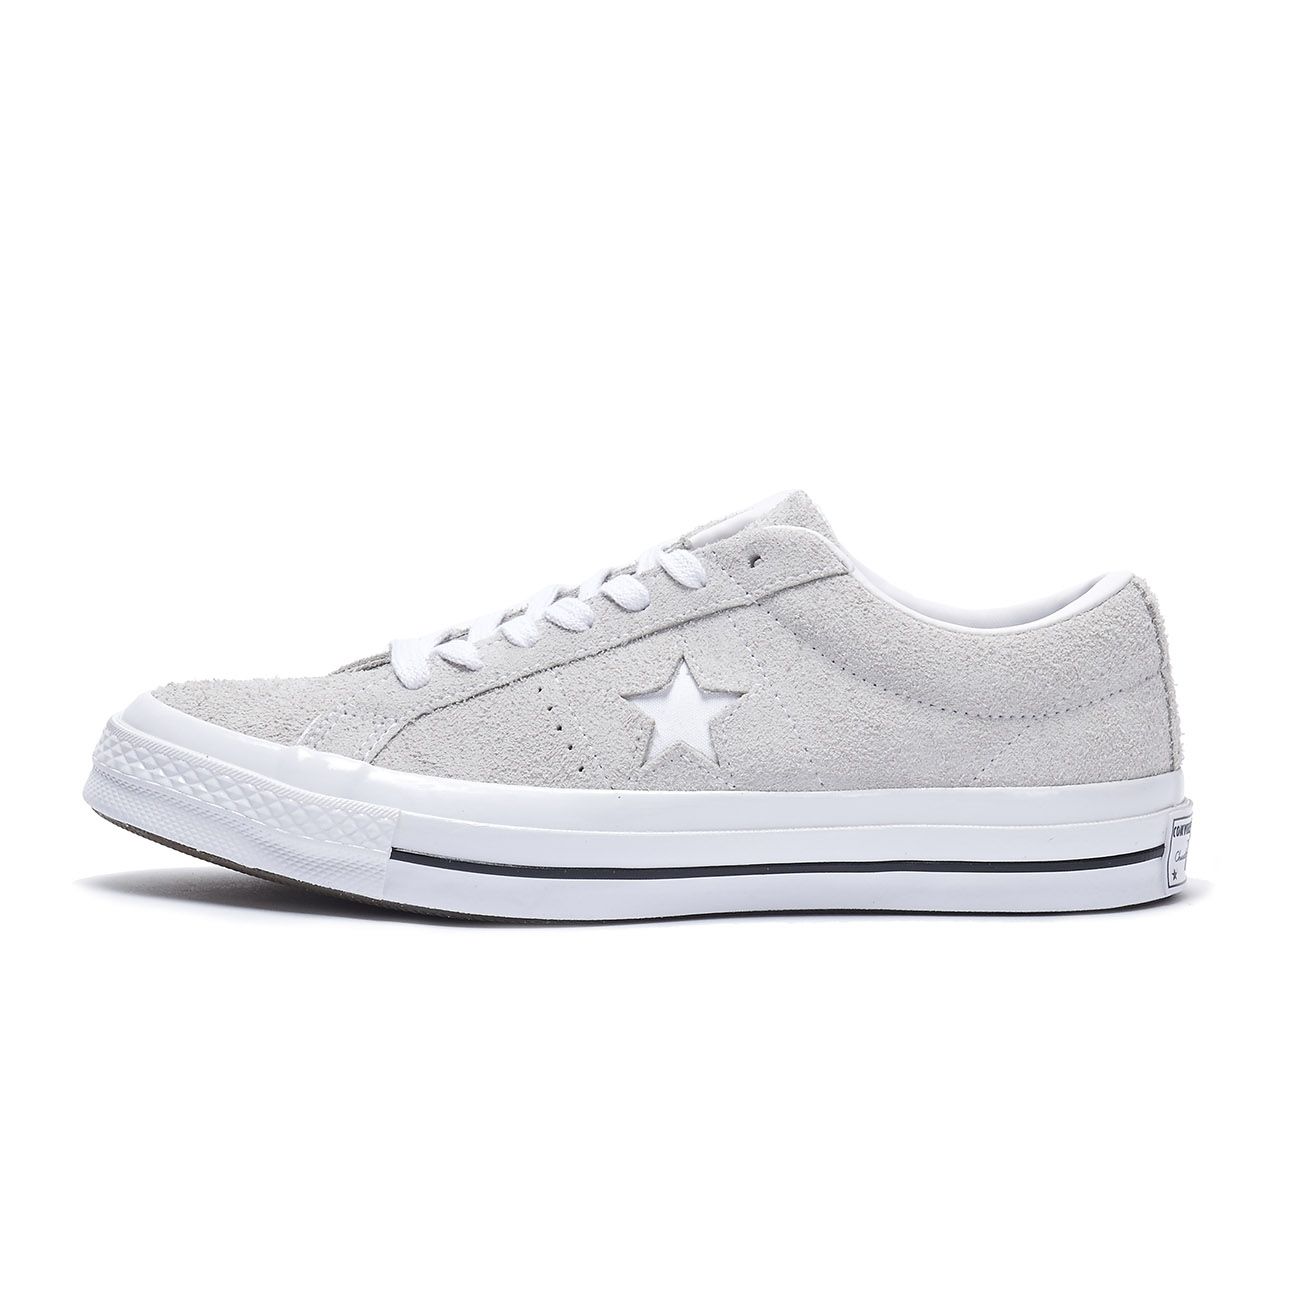 CONVERSE ONE STAR SUEDE OX SNEAKERS Man 